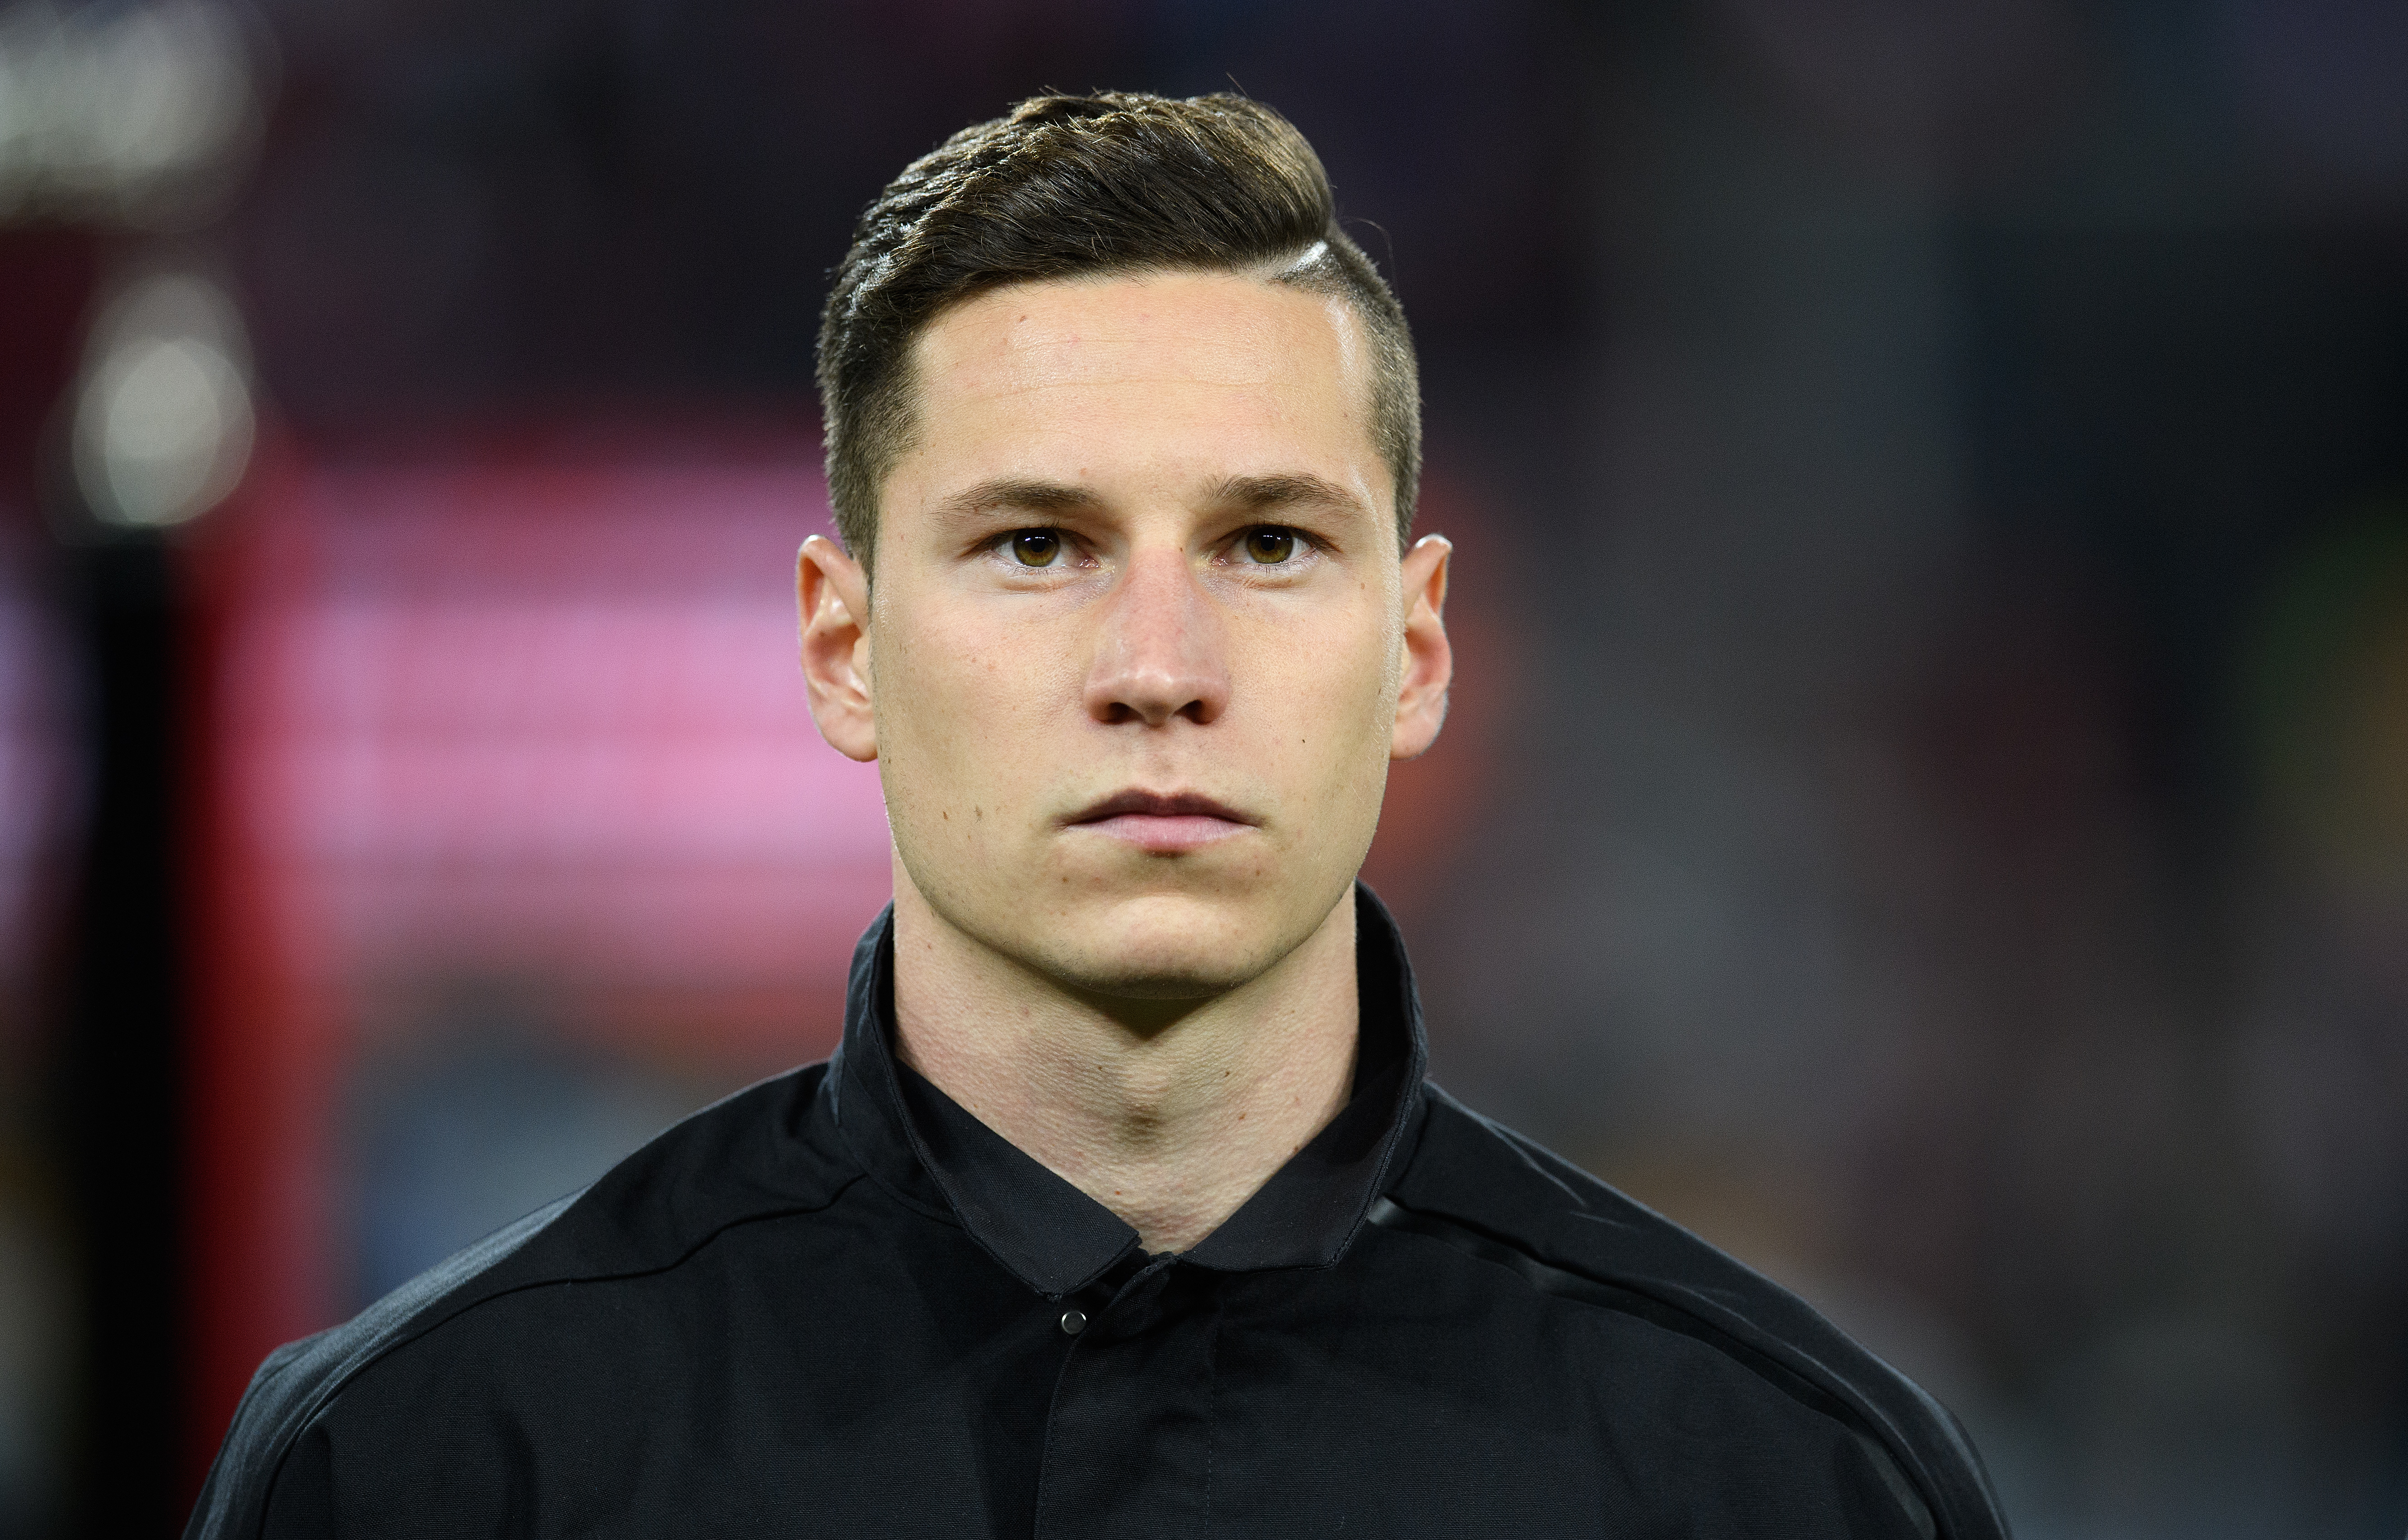 COLOGNE, GERMANY - NOVEMBER 14: Julian Draxler of Germany looks on during the National Anthems prior to the International friendly match between Germany and France at RheinEnergieStadion on November 14, 2017 in Cologne, Germany. (Photo by Matthias Hangst/Bongarts/Getty Images)